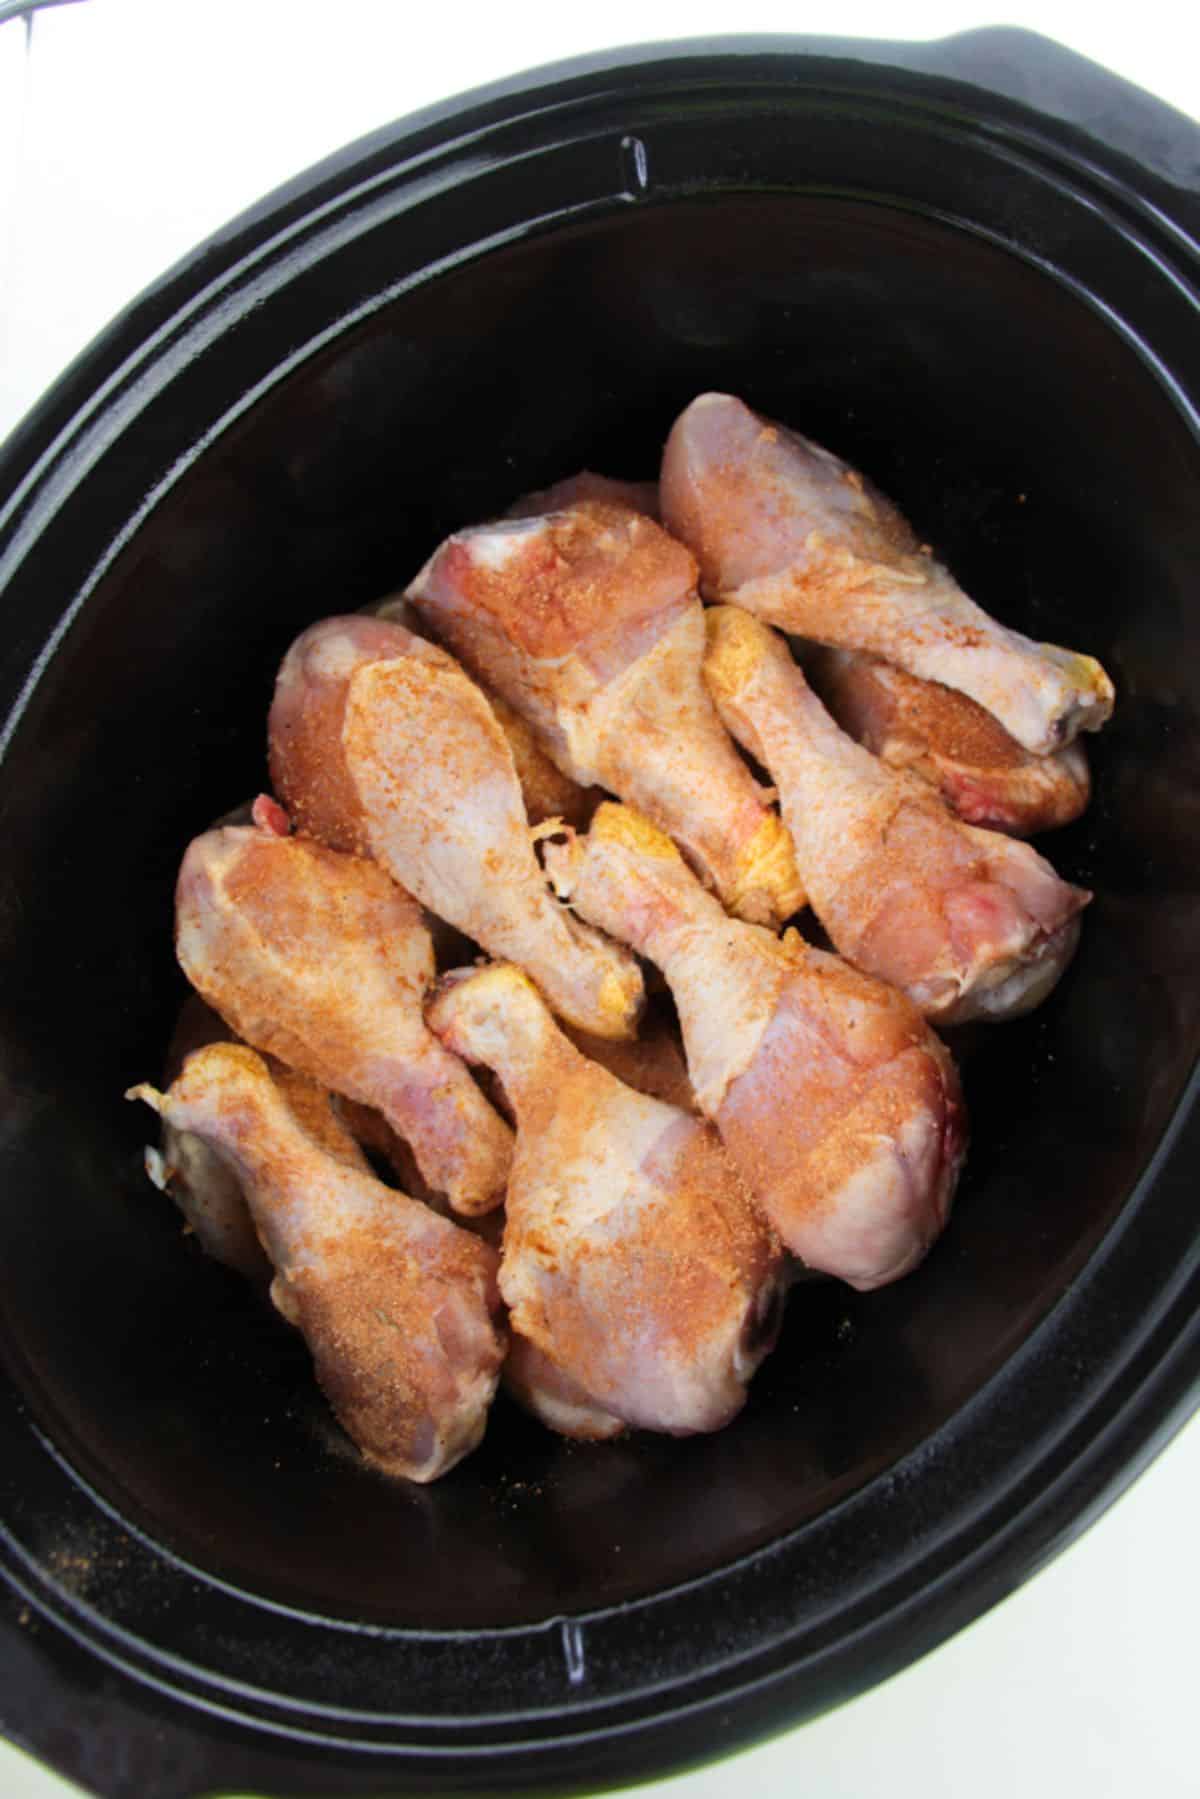 Rotisserie seasoning is added to the chicken legs inside the slow cooker.